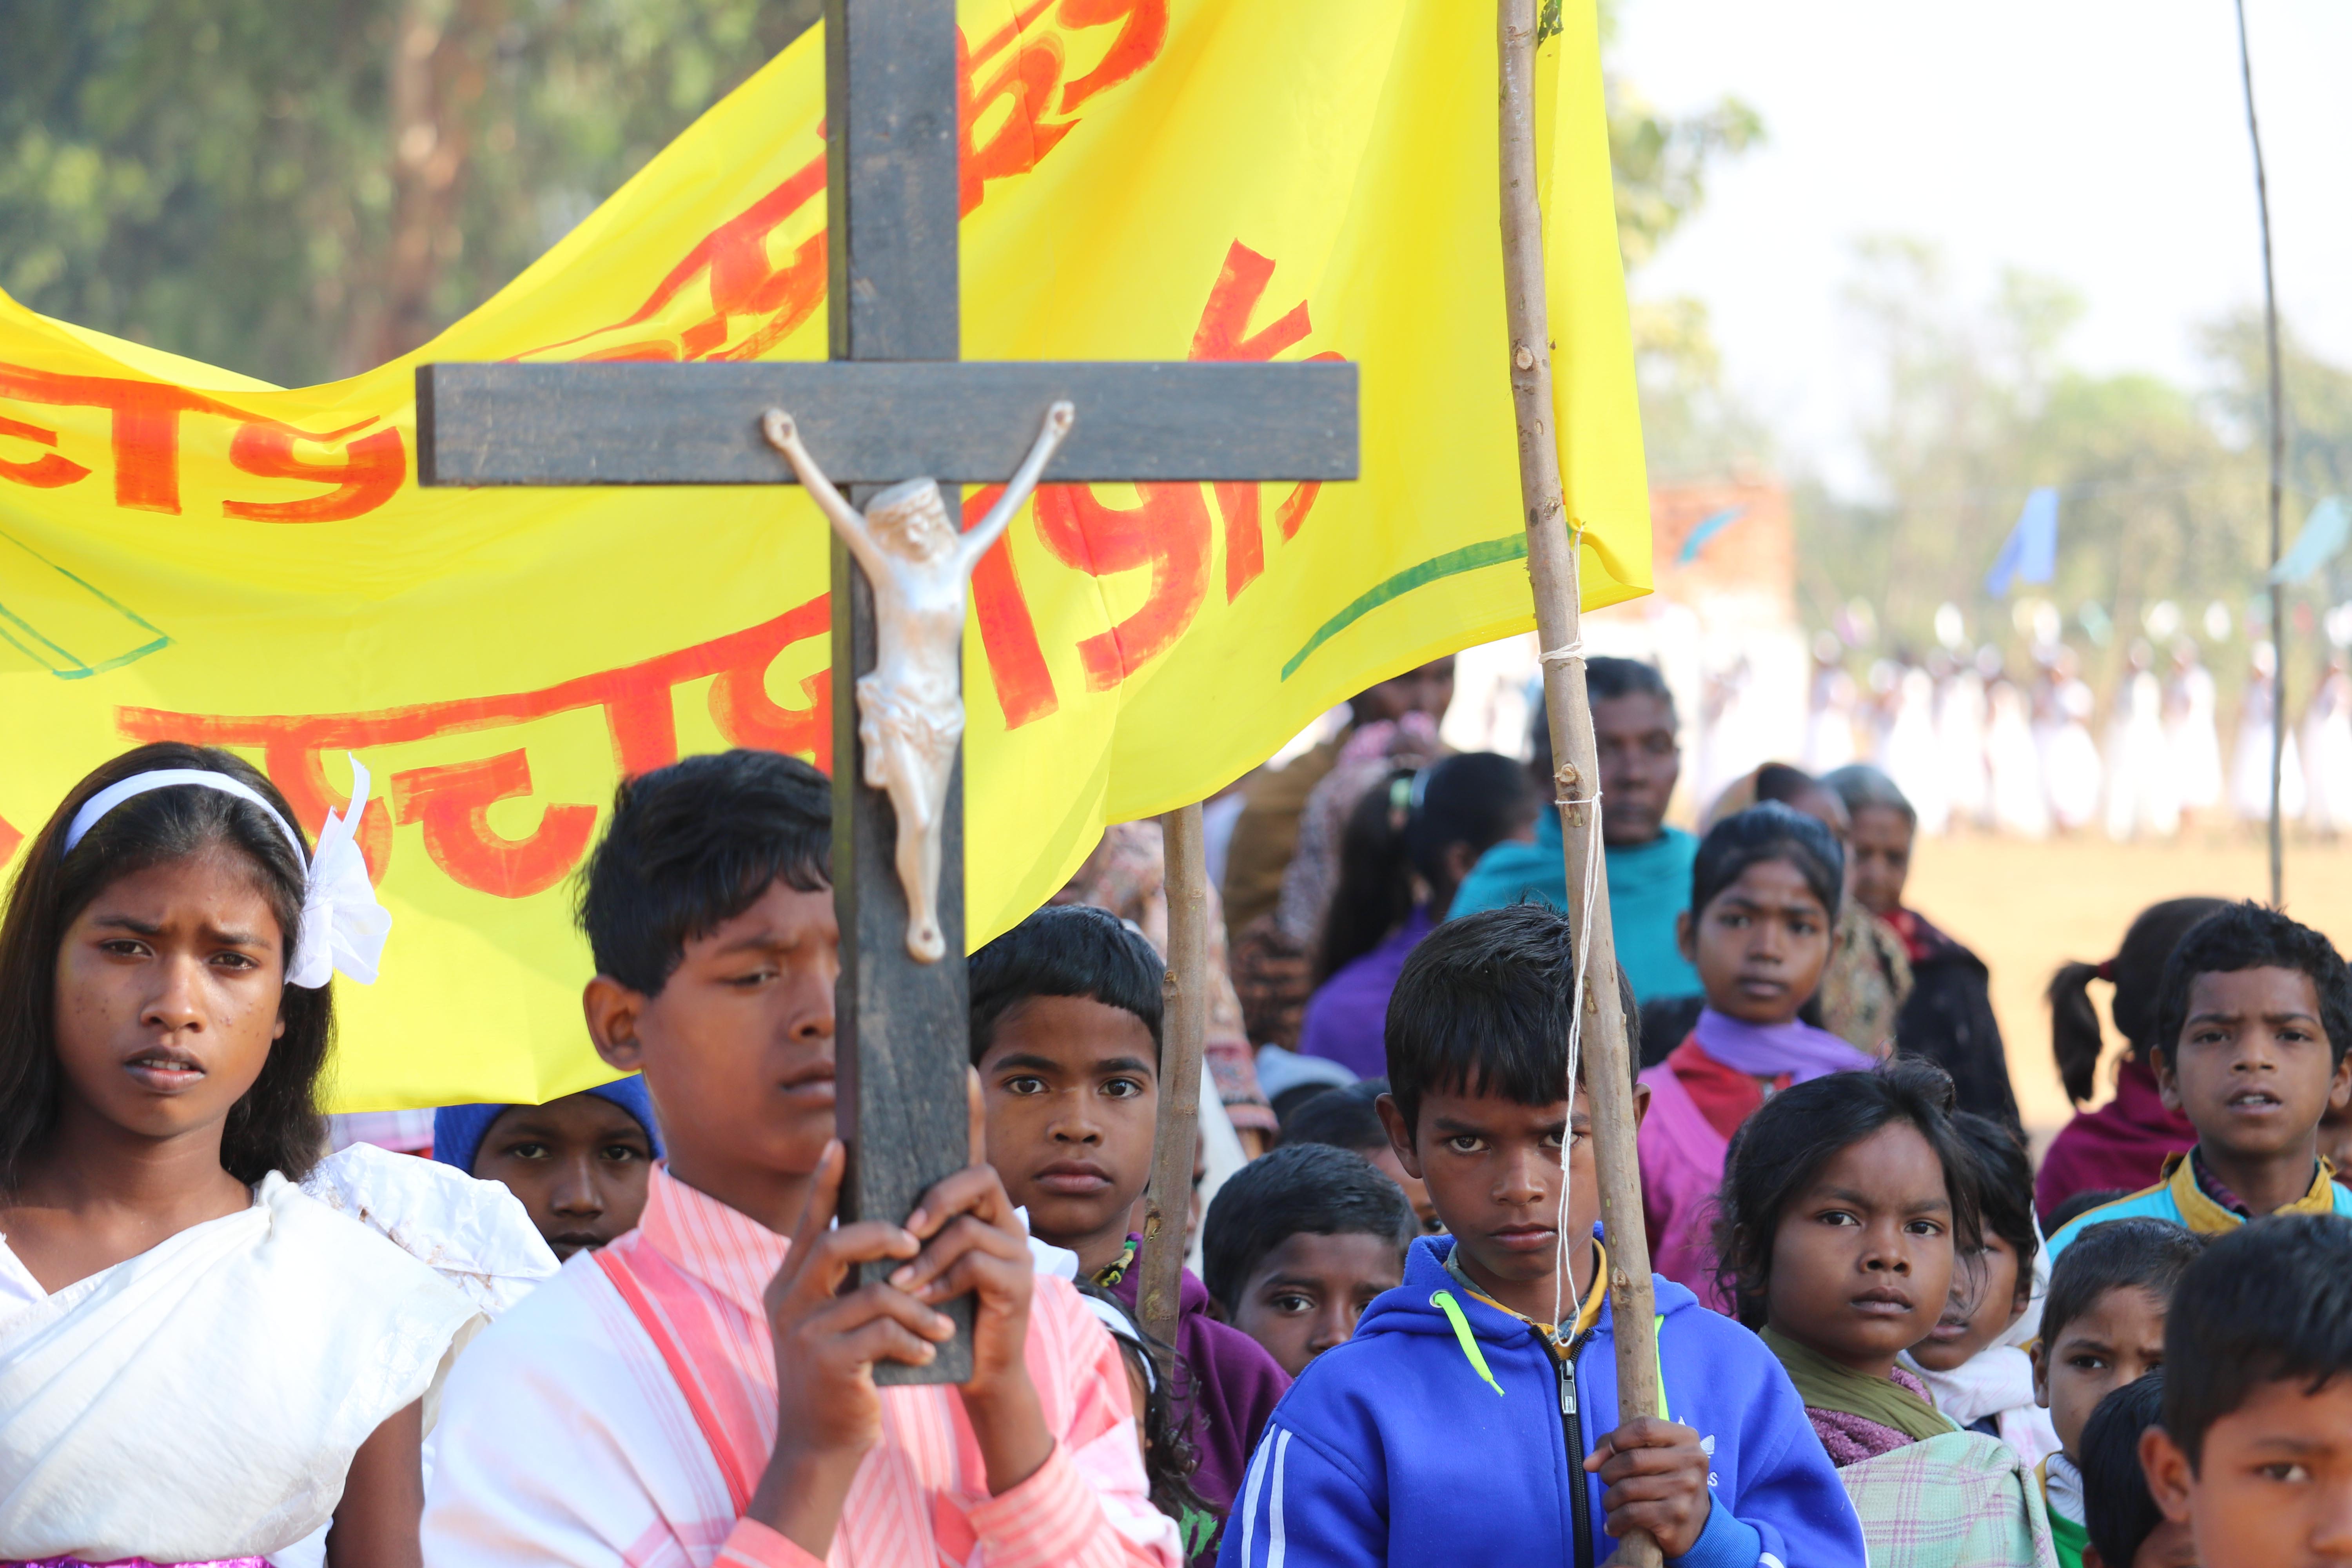 Christians in procession in Jharkhand state, India © Aid to the Church in Need